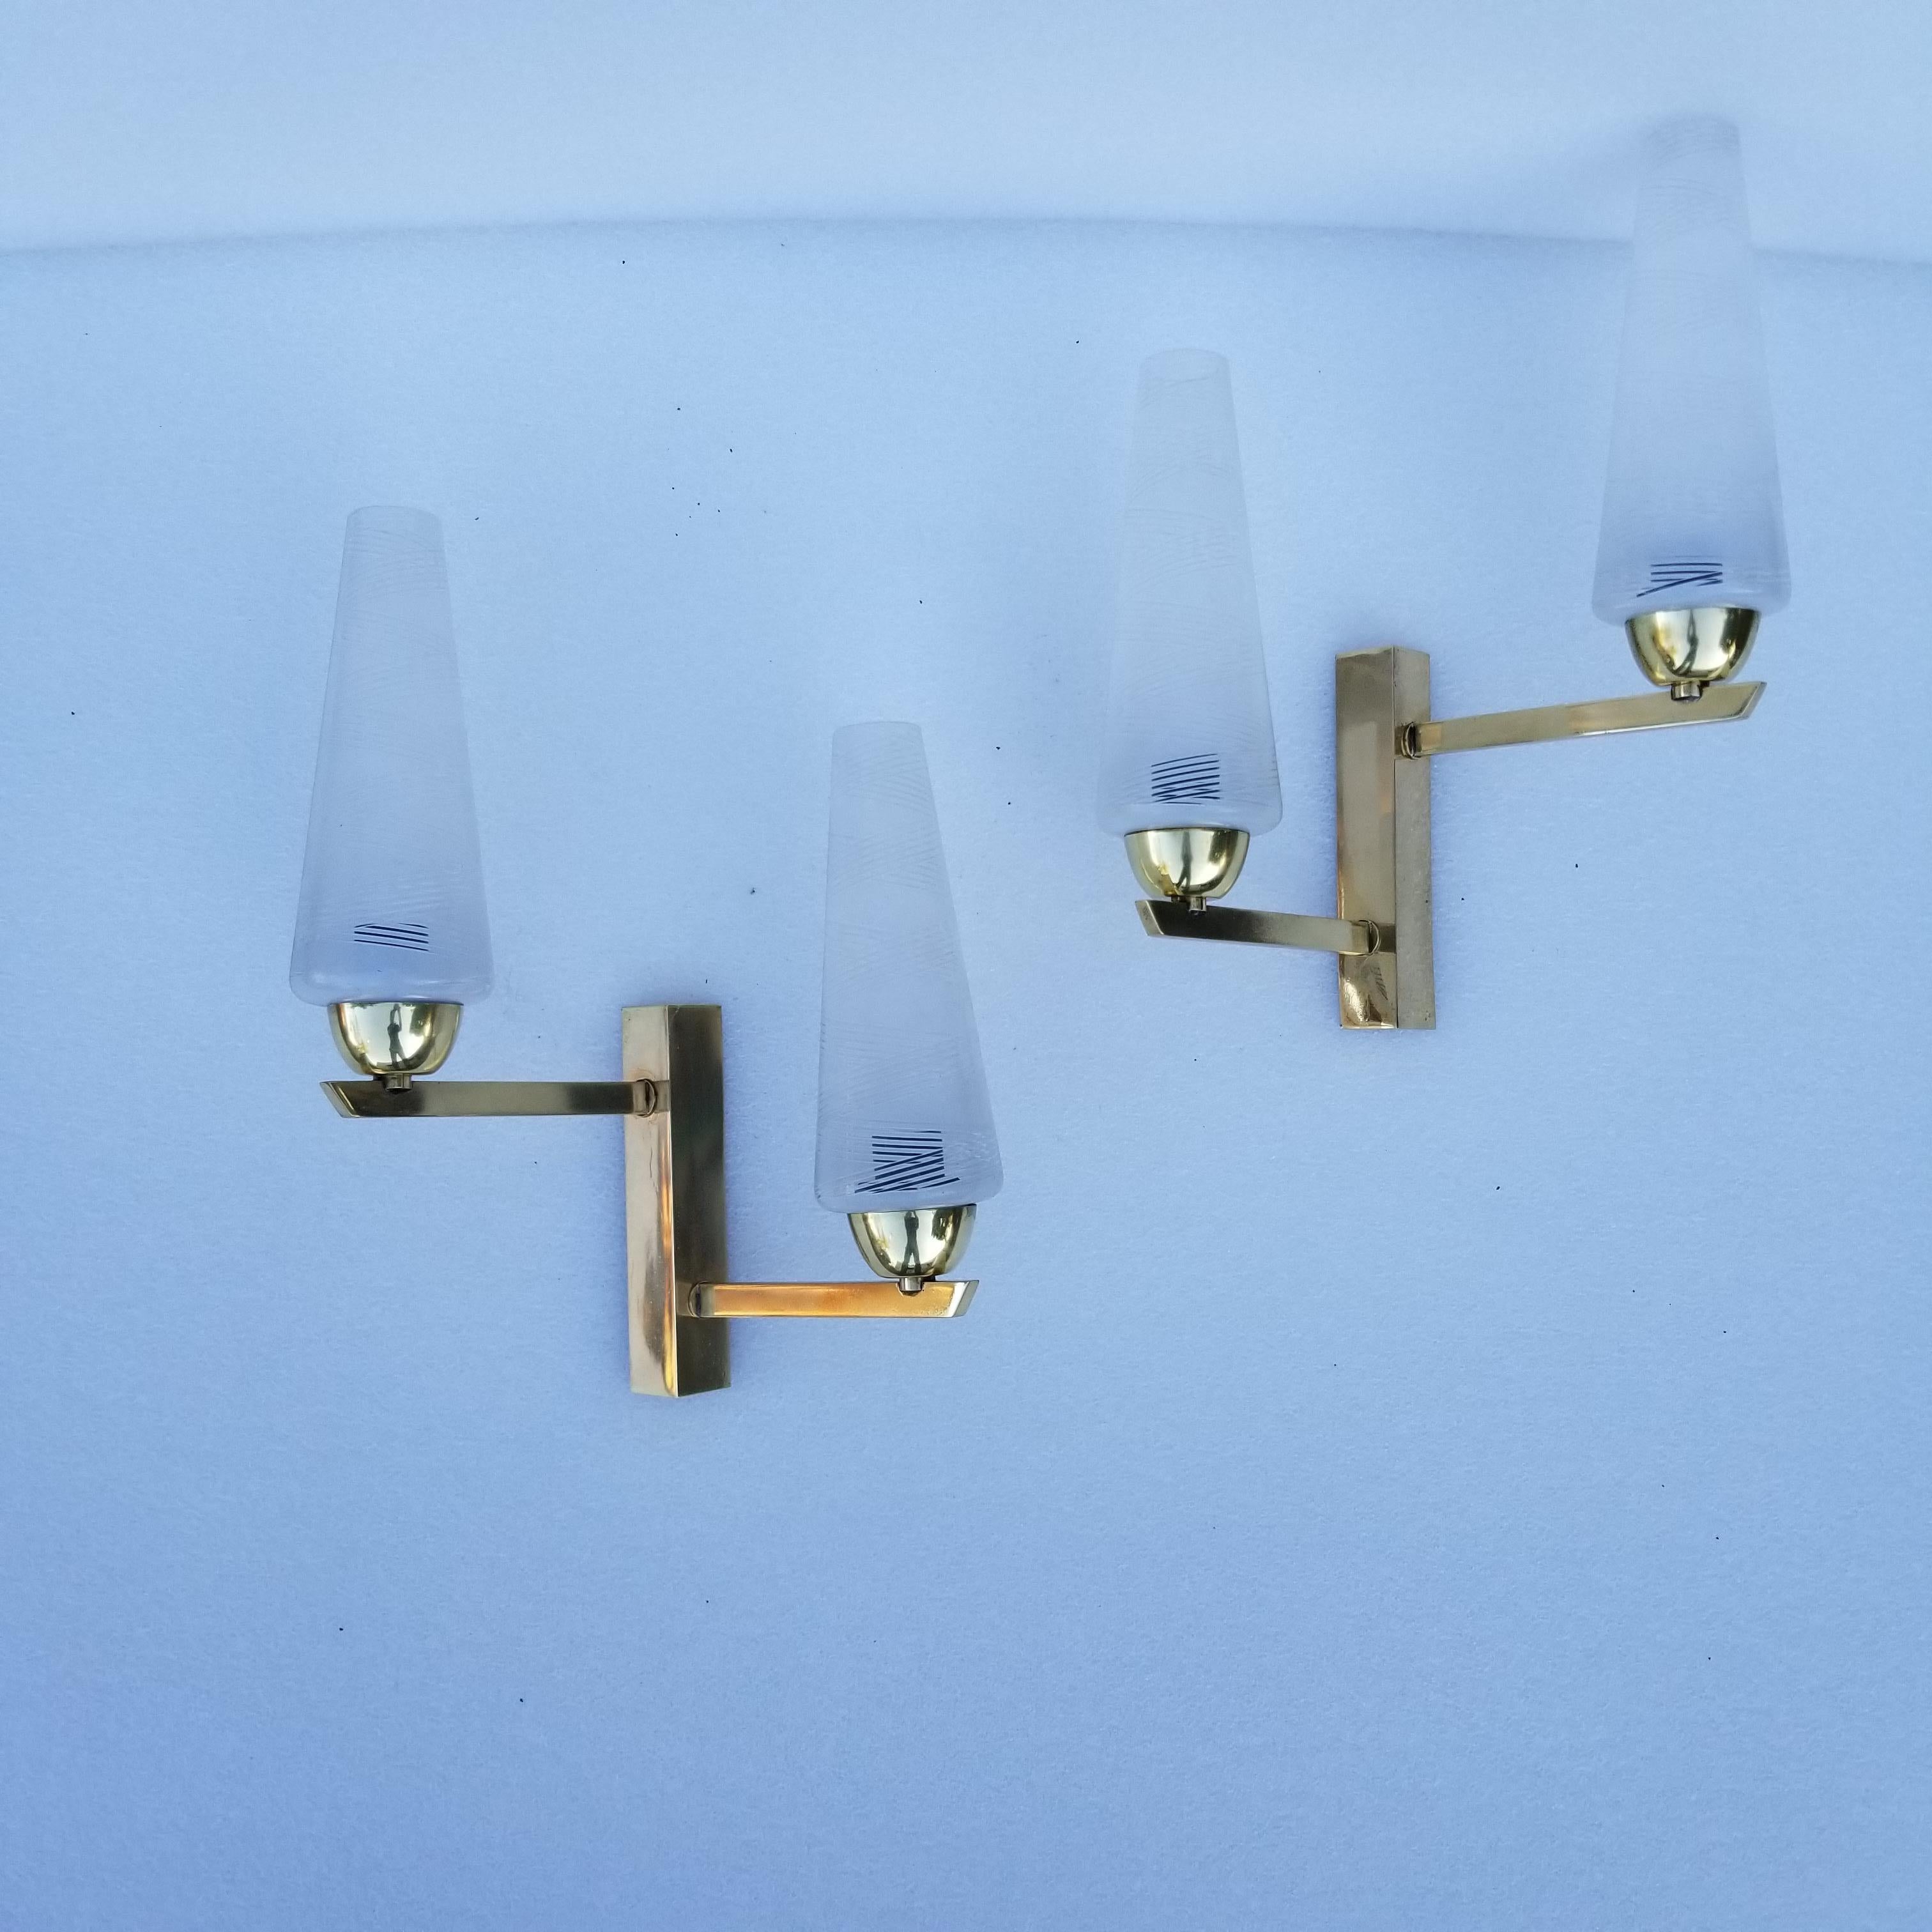 Pair of Maison Lunel sconces. 2 pairs available
2-light, 40 watts max bulb
US rewired, restored.
Have a look at our sconces inventory, more than 200 pairs.